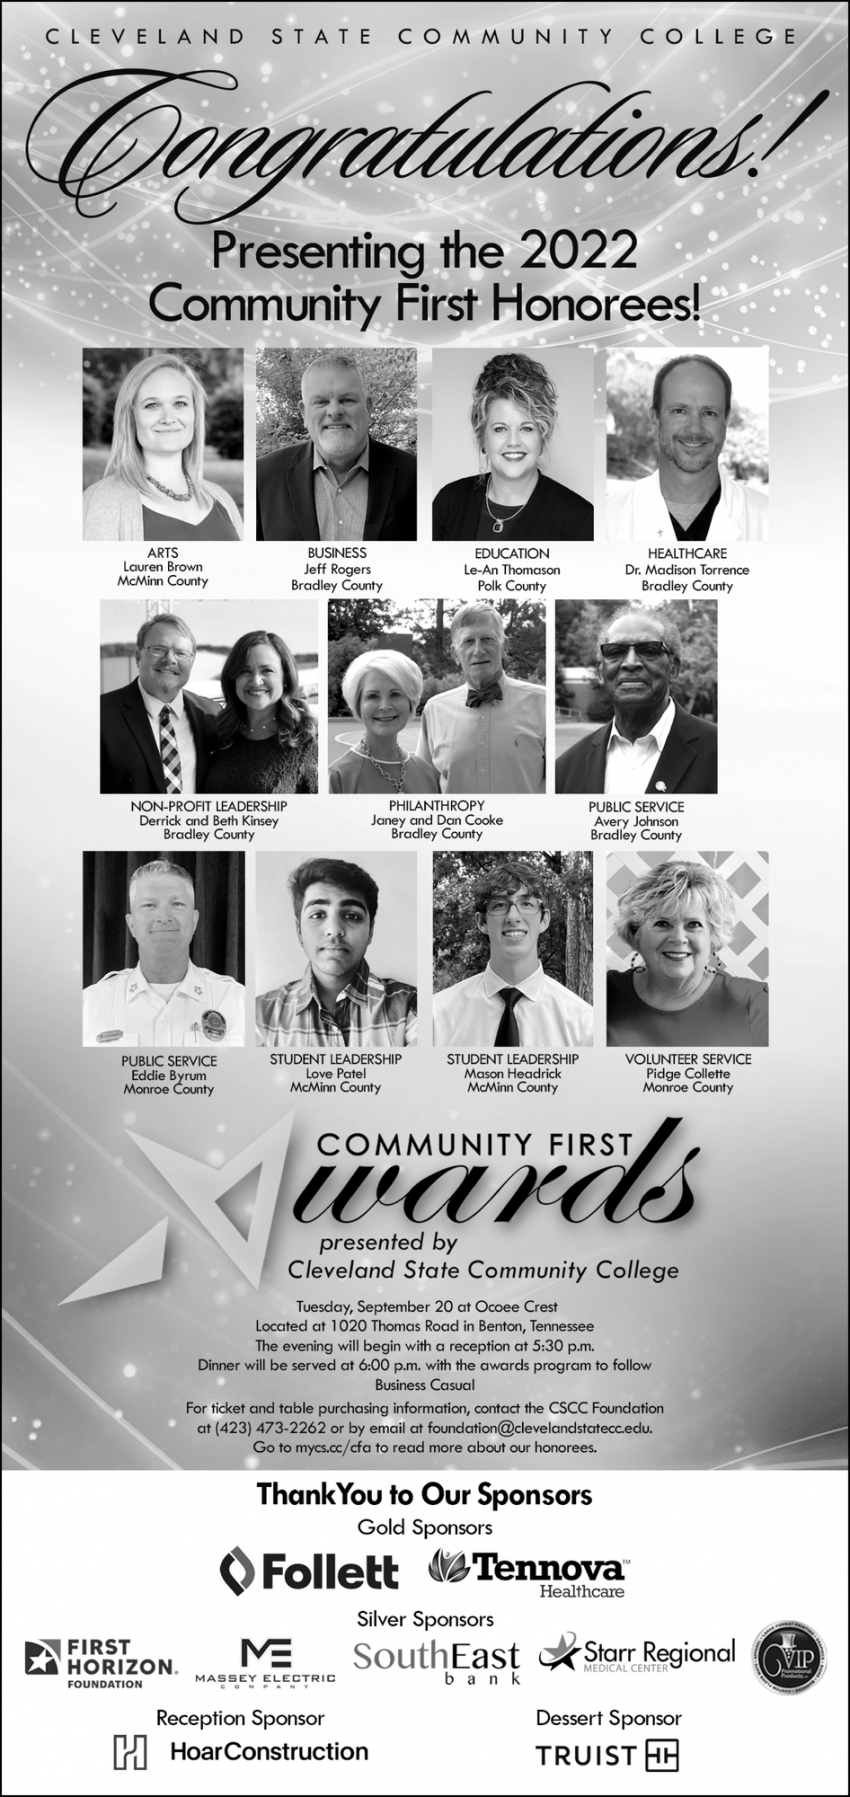 Presenting the 2022 Community First Honorees